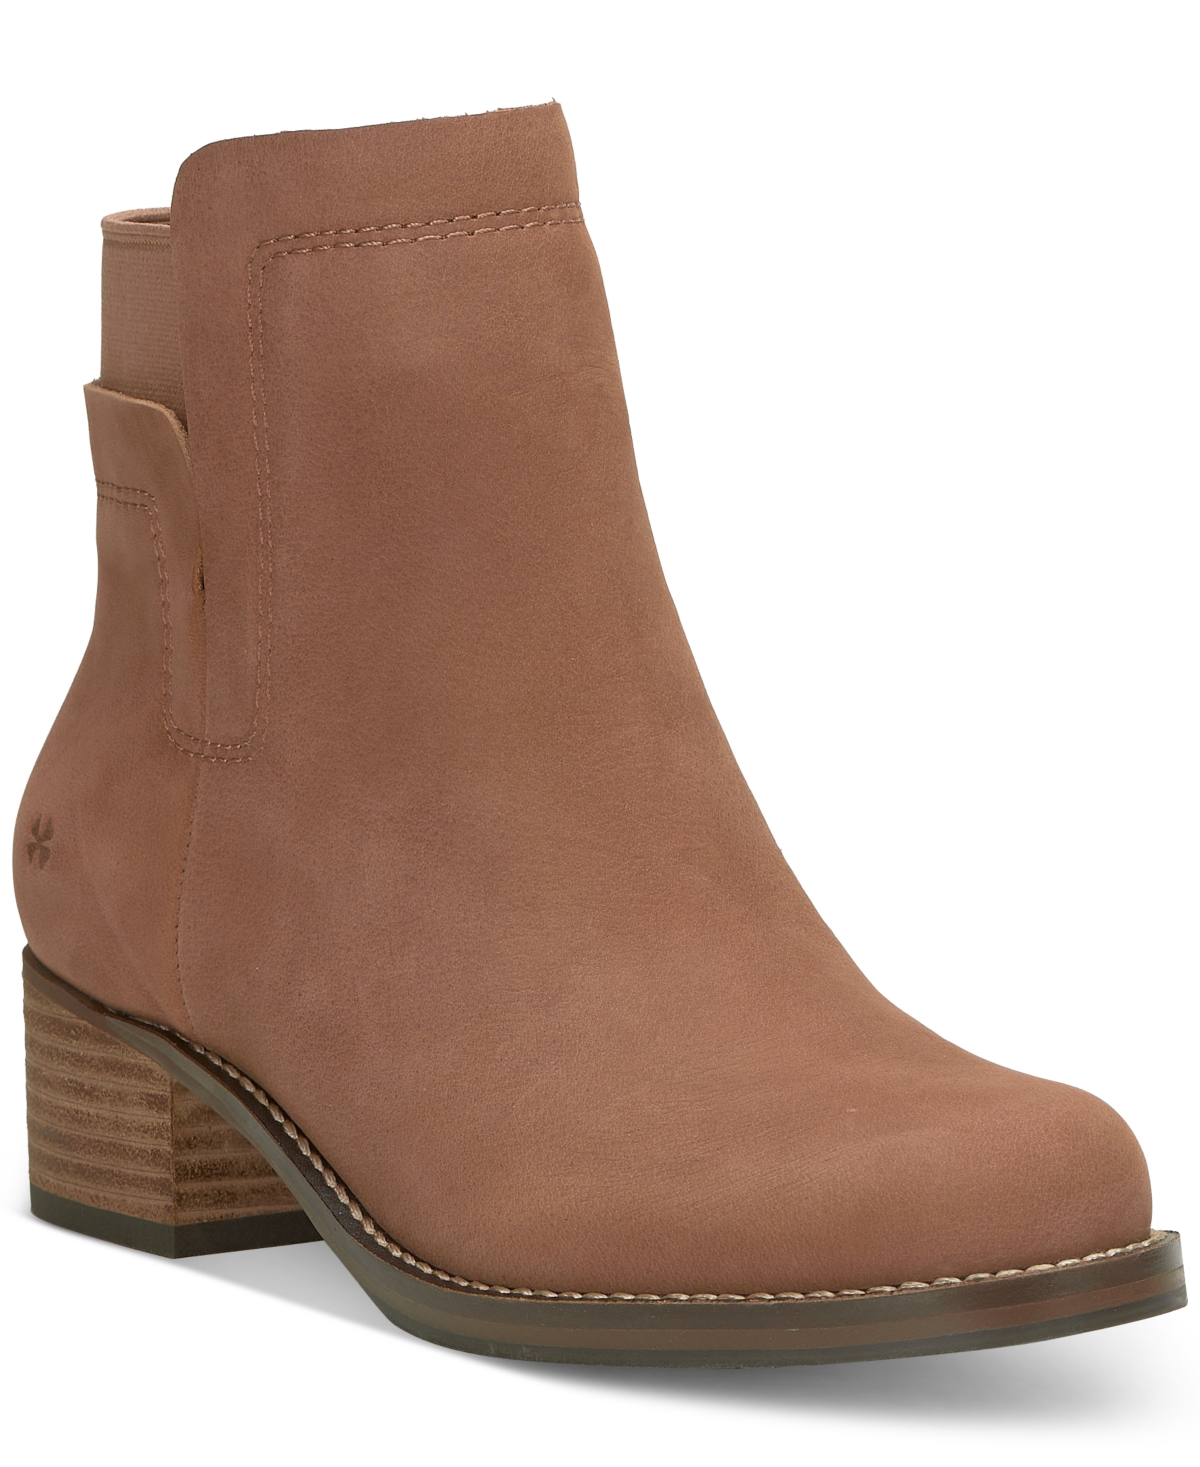 Women's Hirsi Pull-On Ankle Booties - Latte Leather